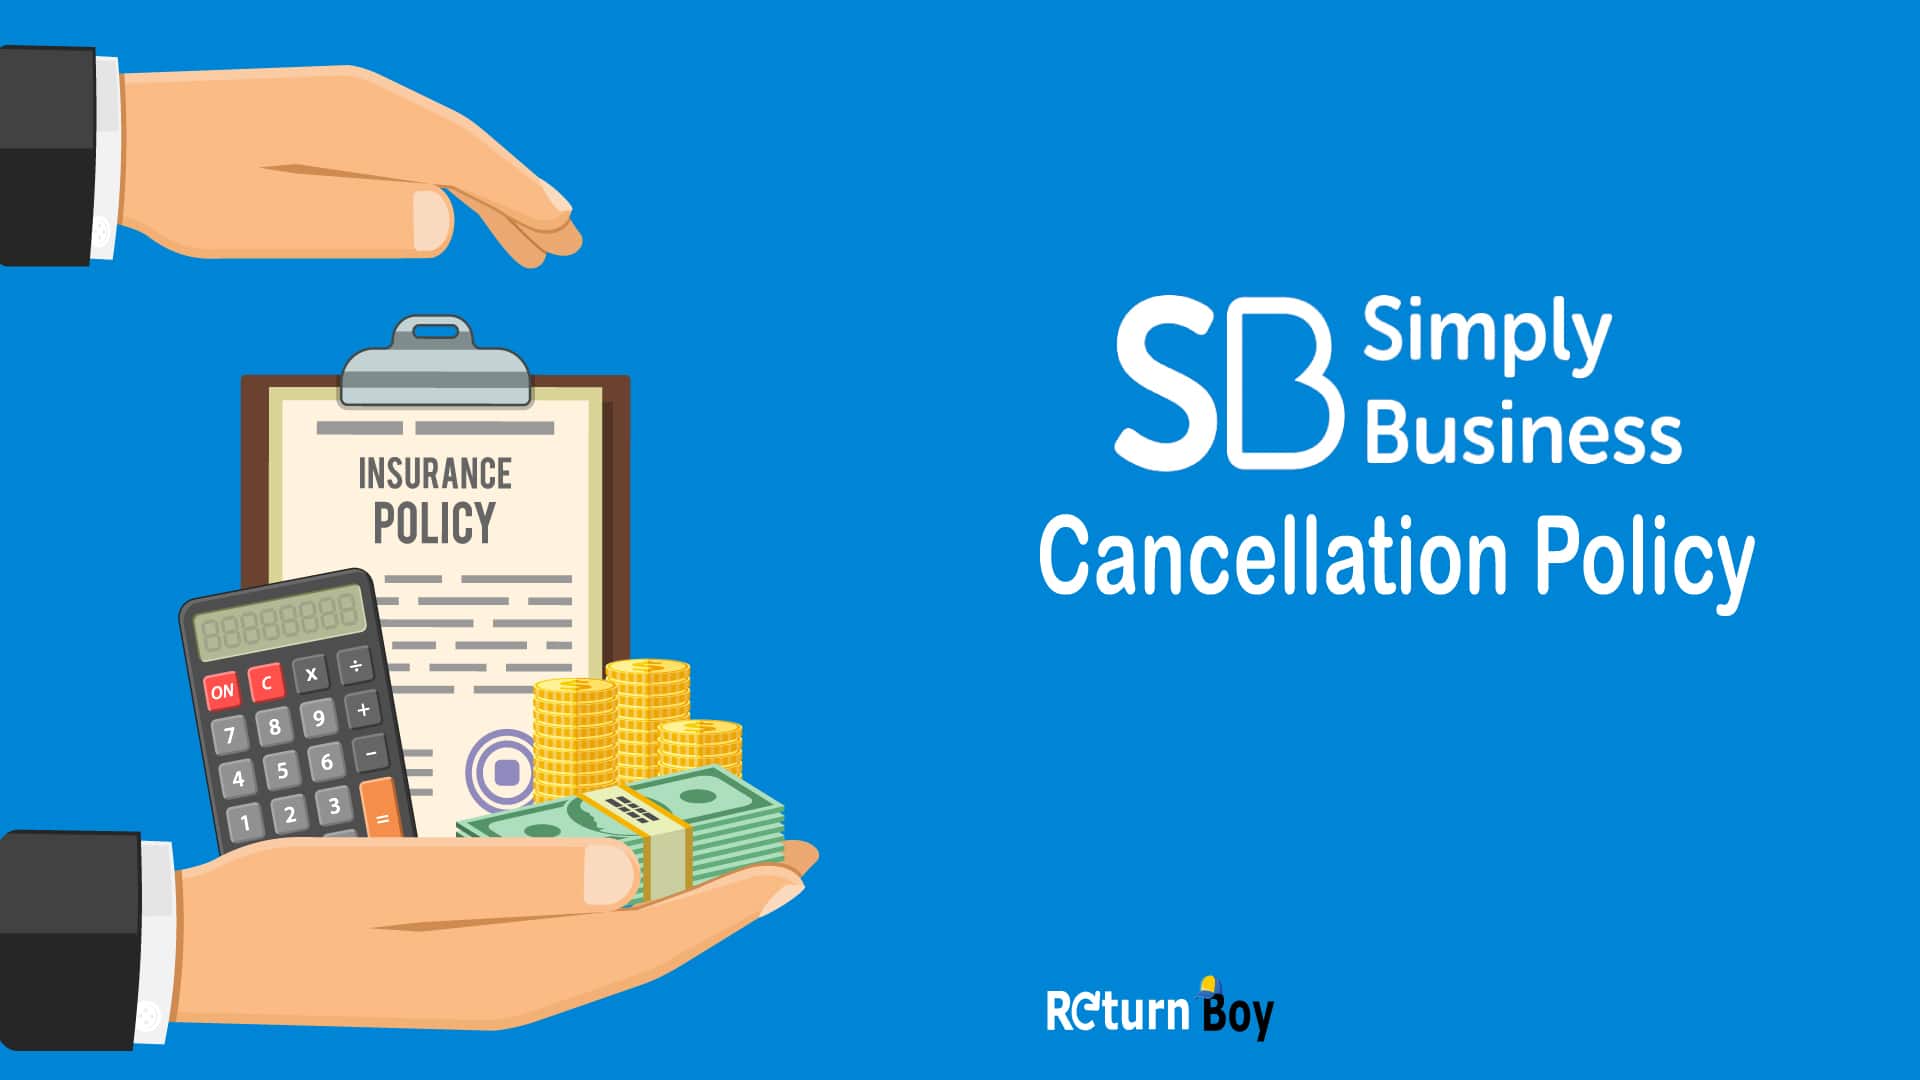 Simply Business Cancellation policy